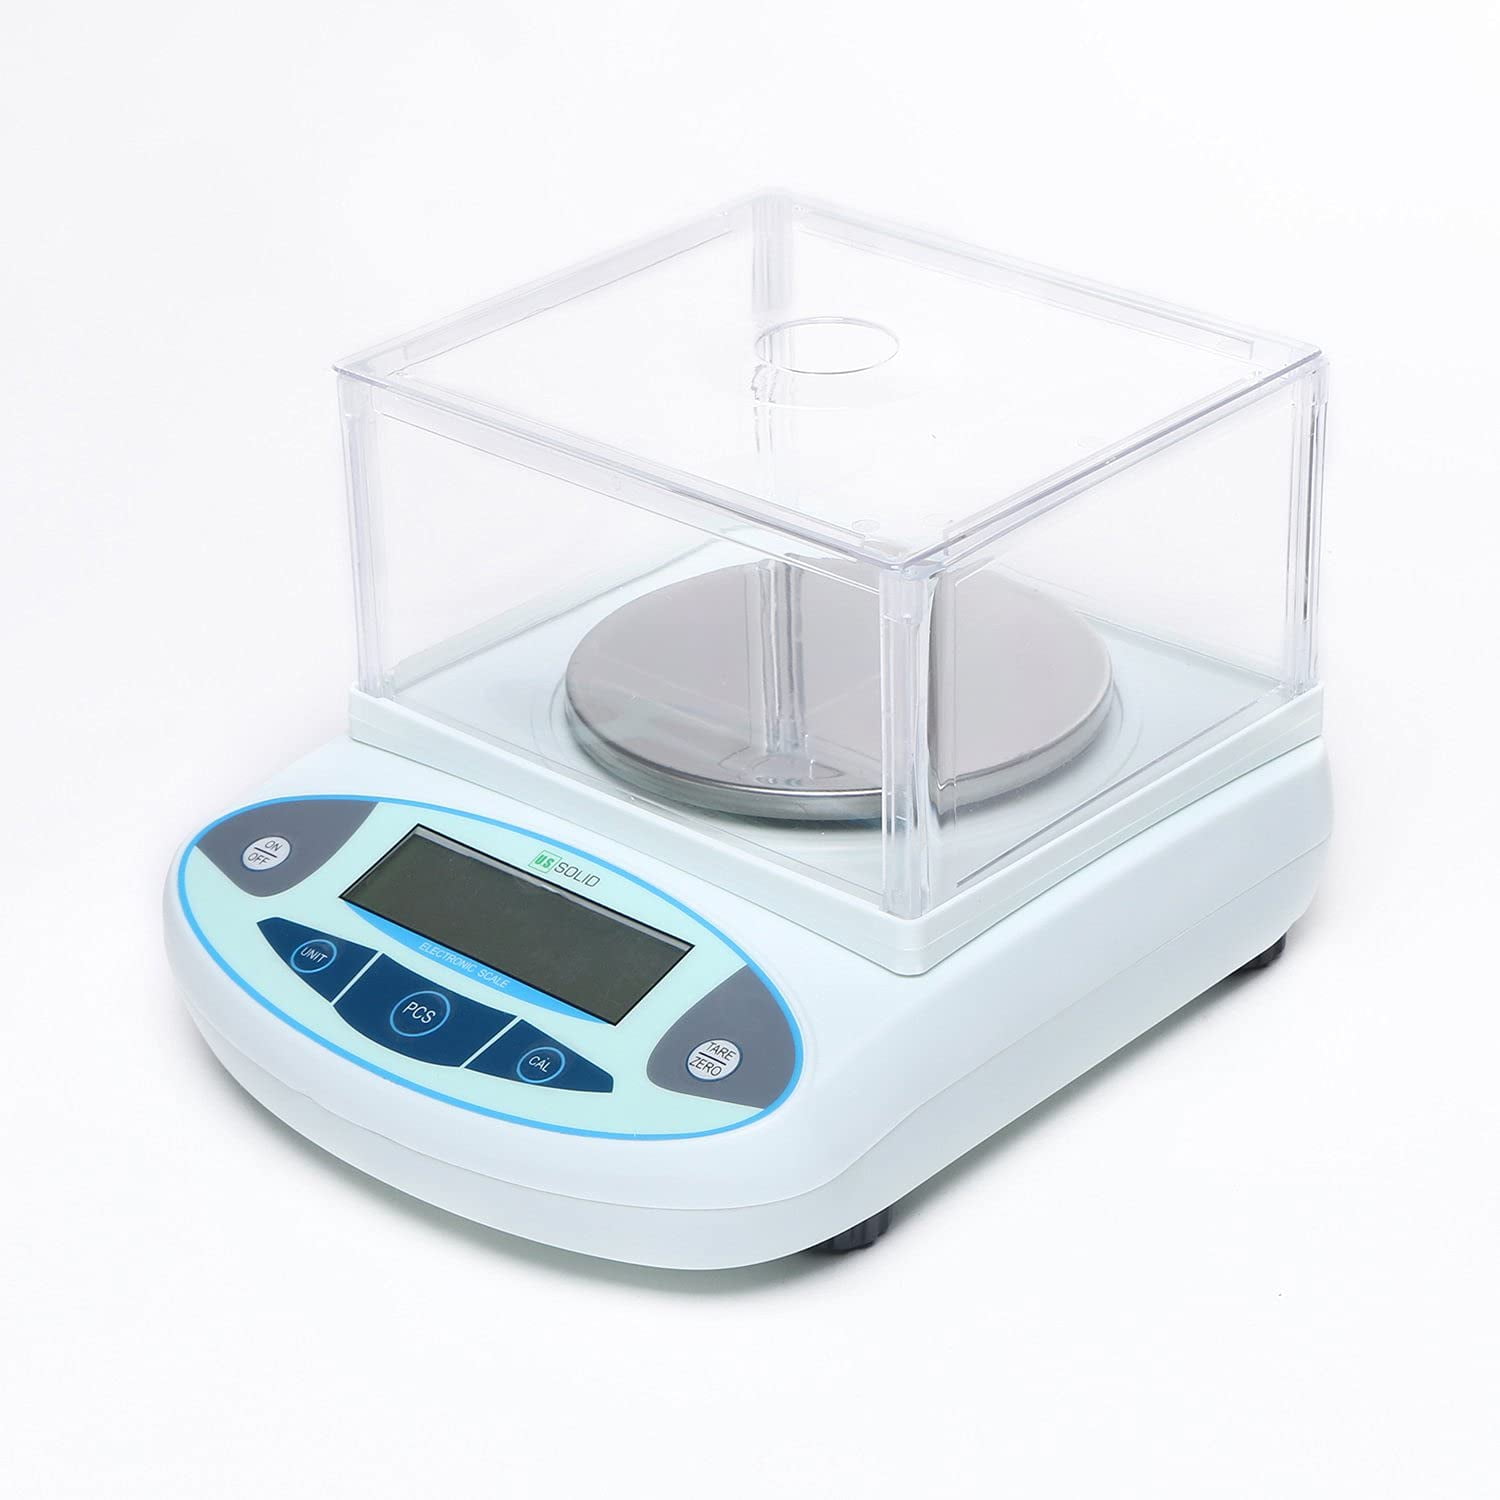 OUKANING Precise Digital Counting Scale Parts Coin Counting Scale Weighing  Balance Food Meat Scales 66Lb X 0.002Lb 